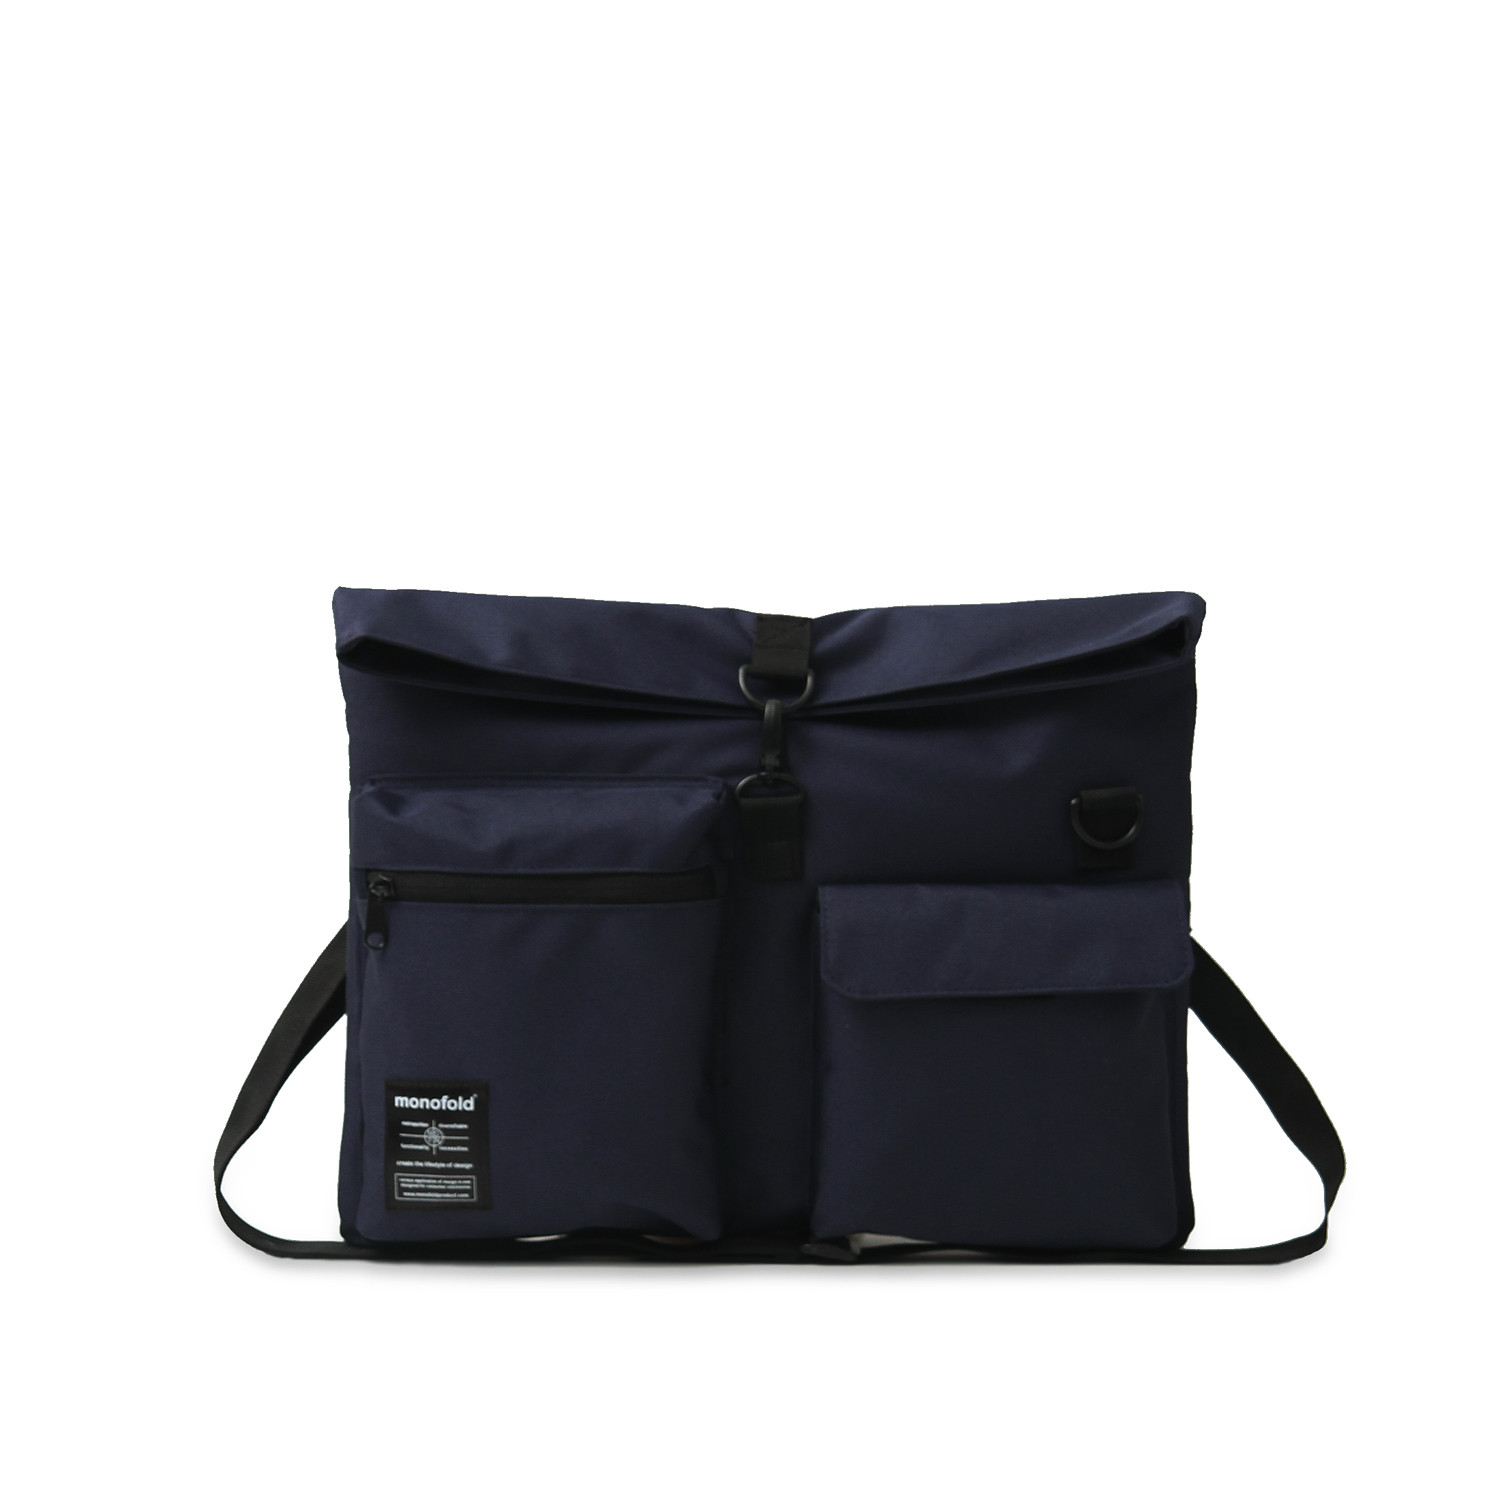 Sling Pack // Laptop (Black) - Monofold - Touch of Modern